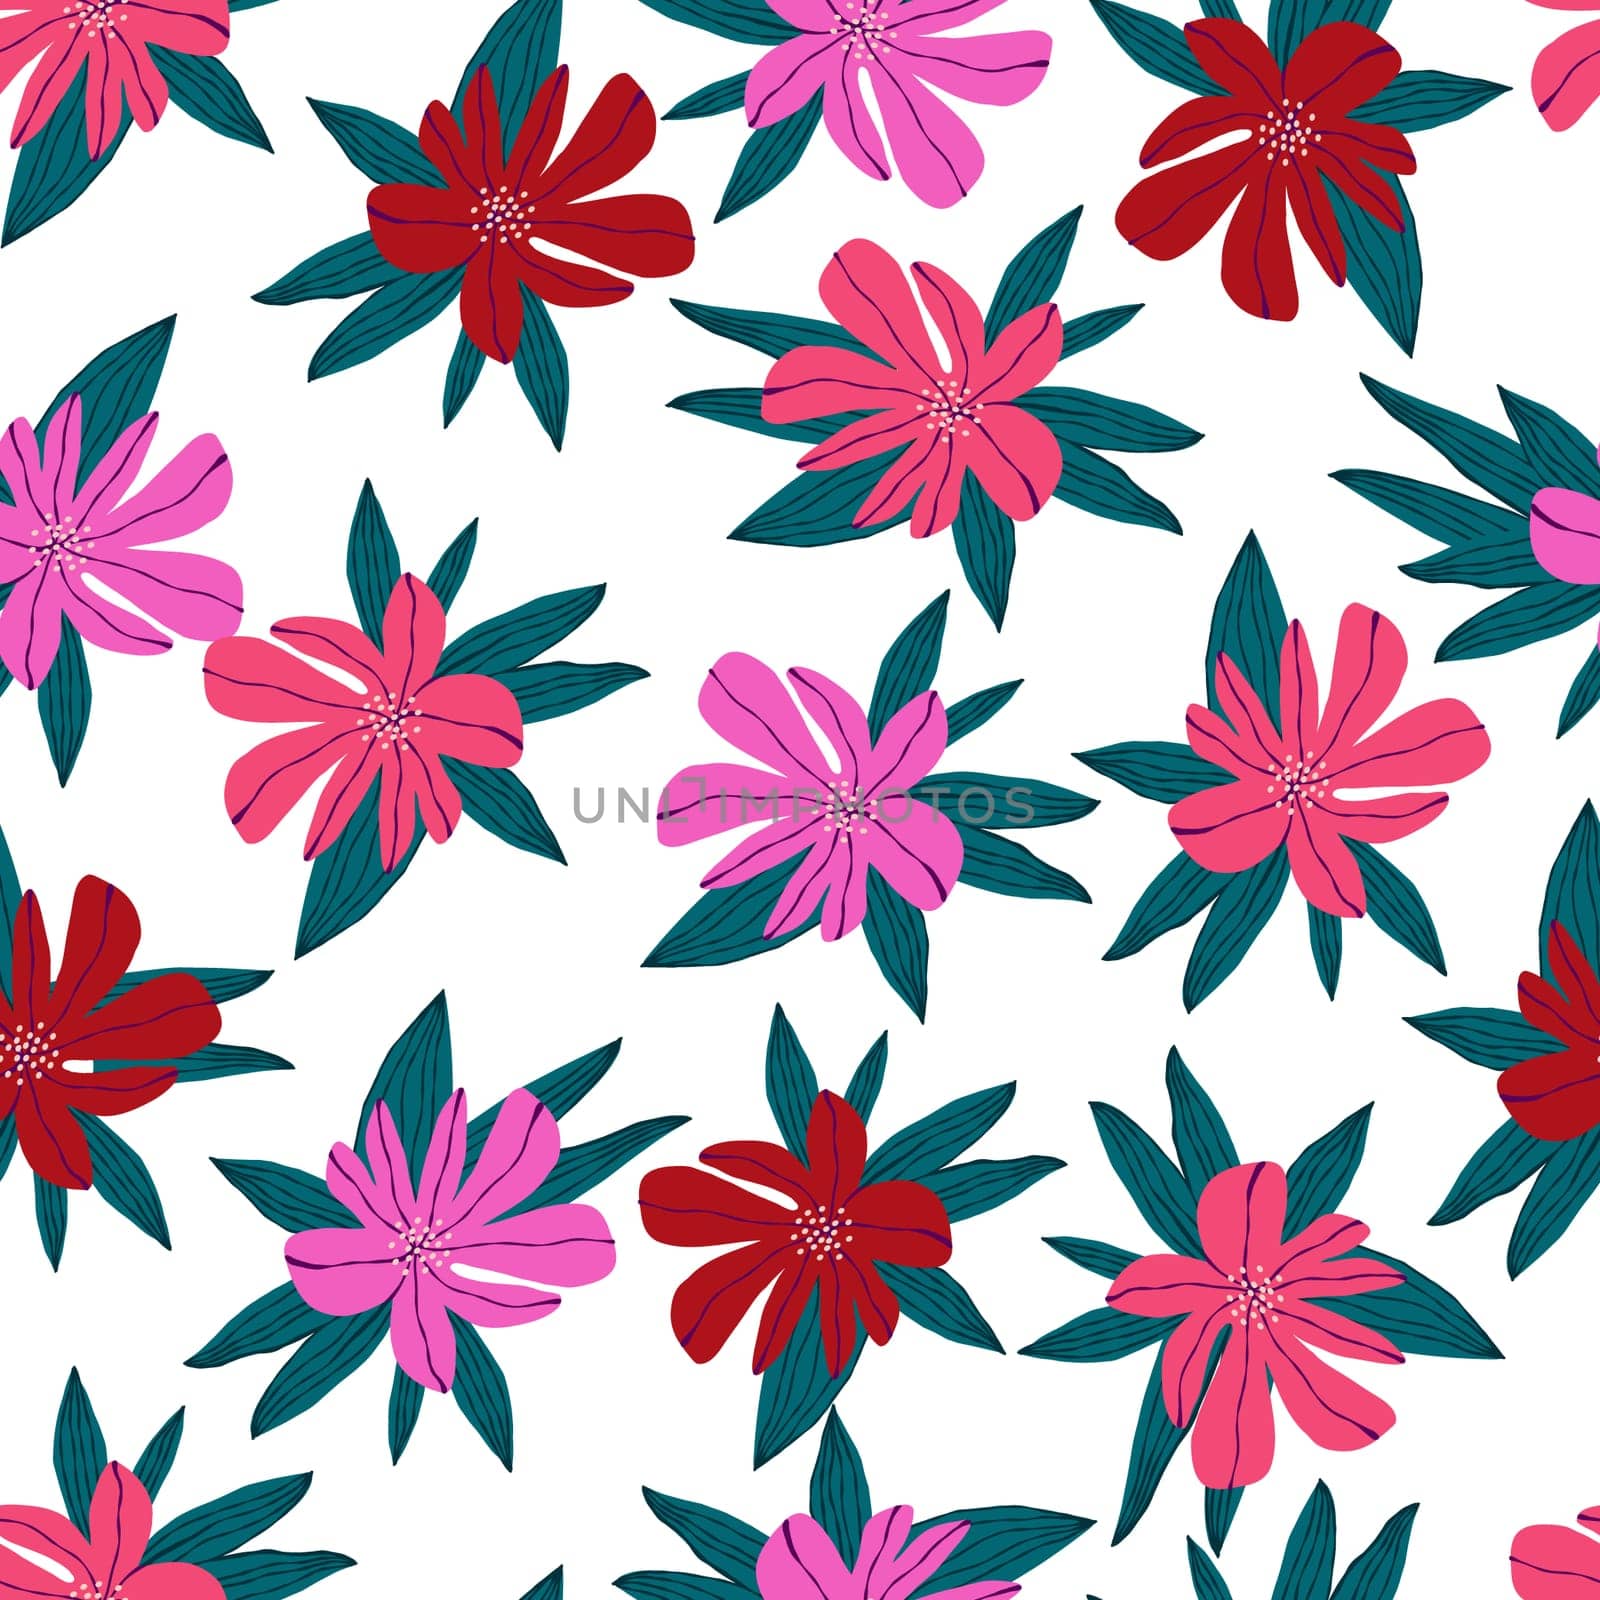 A floral pattern is drawn with pink and red flowers and green leaves by Dustick